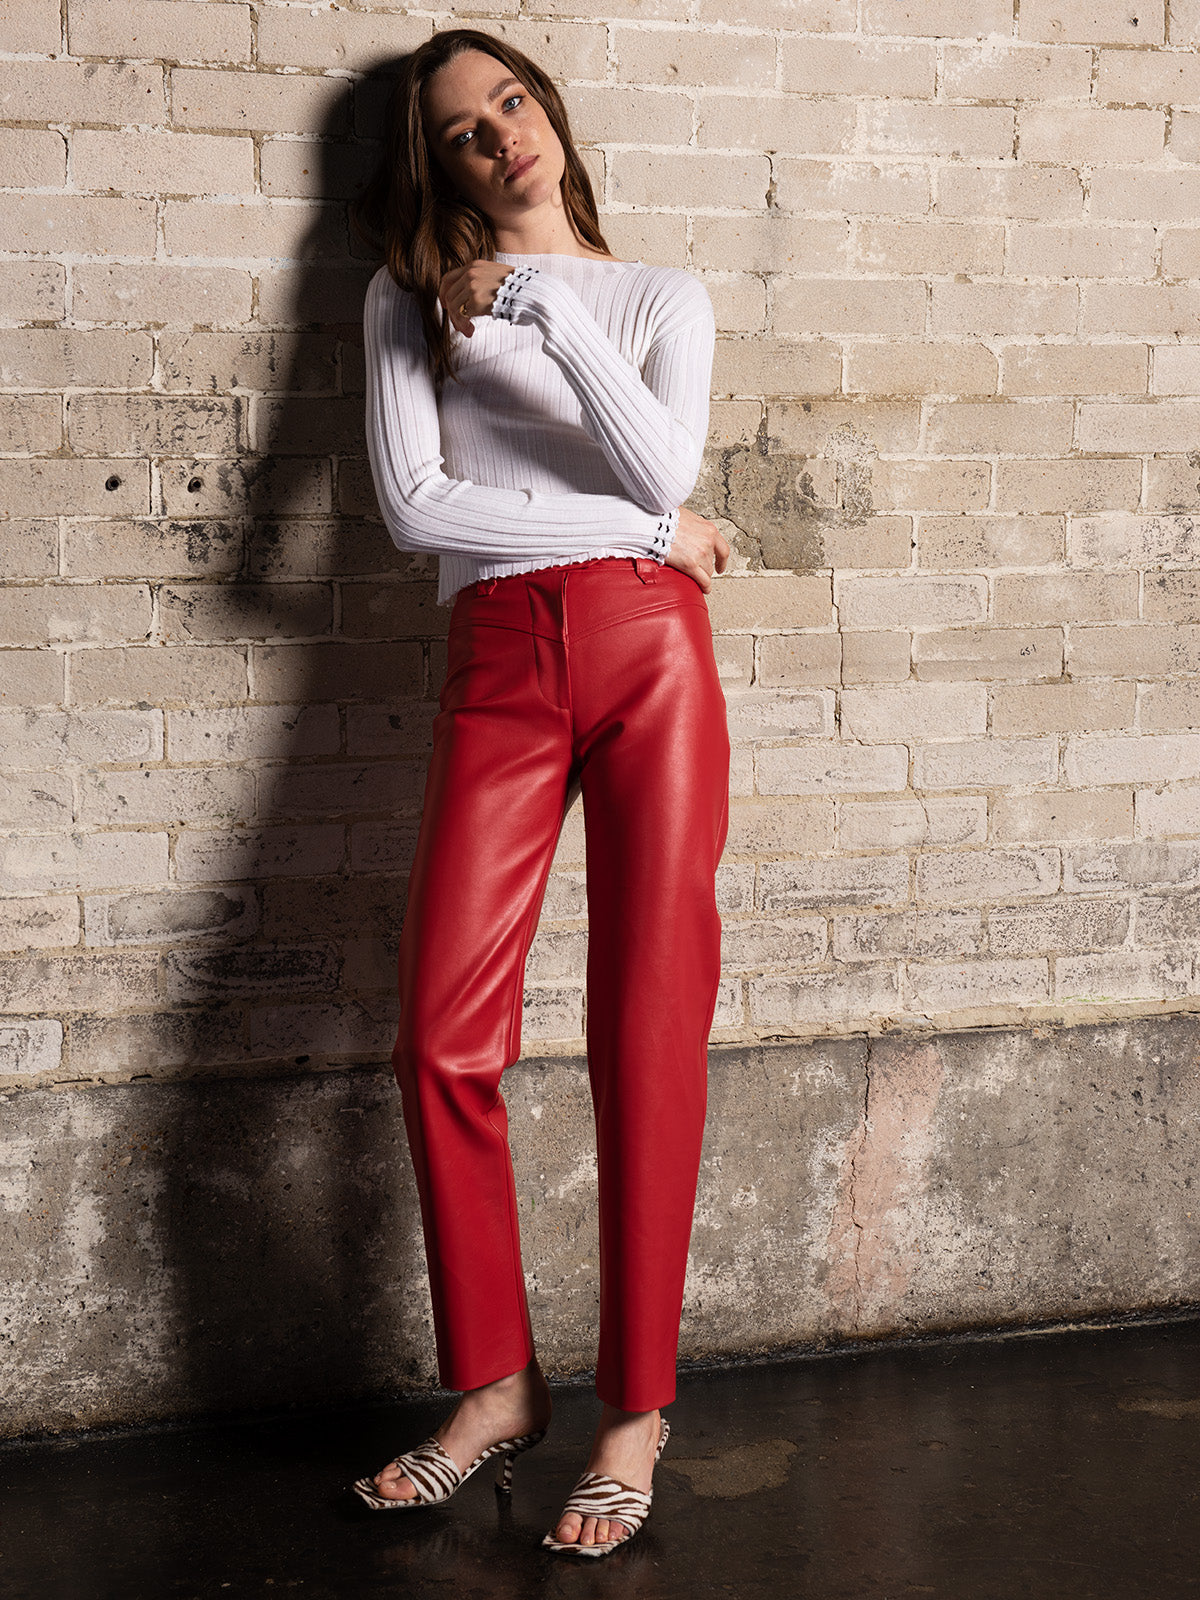 A Stylist's Guide To Wearing Leather Trousers In Spring | SheerLuxe